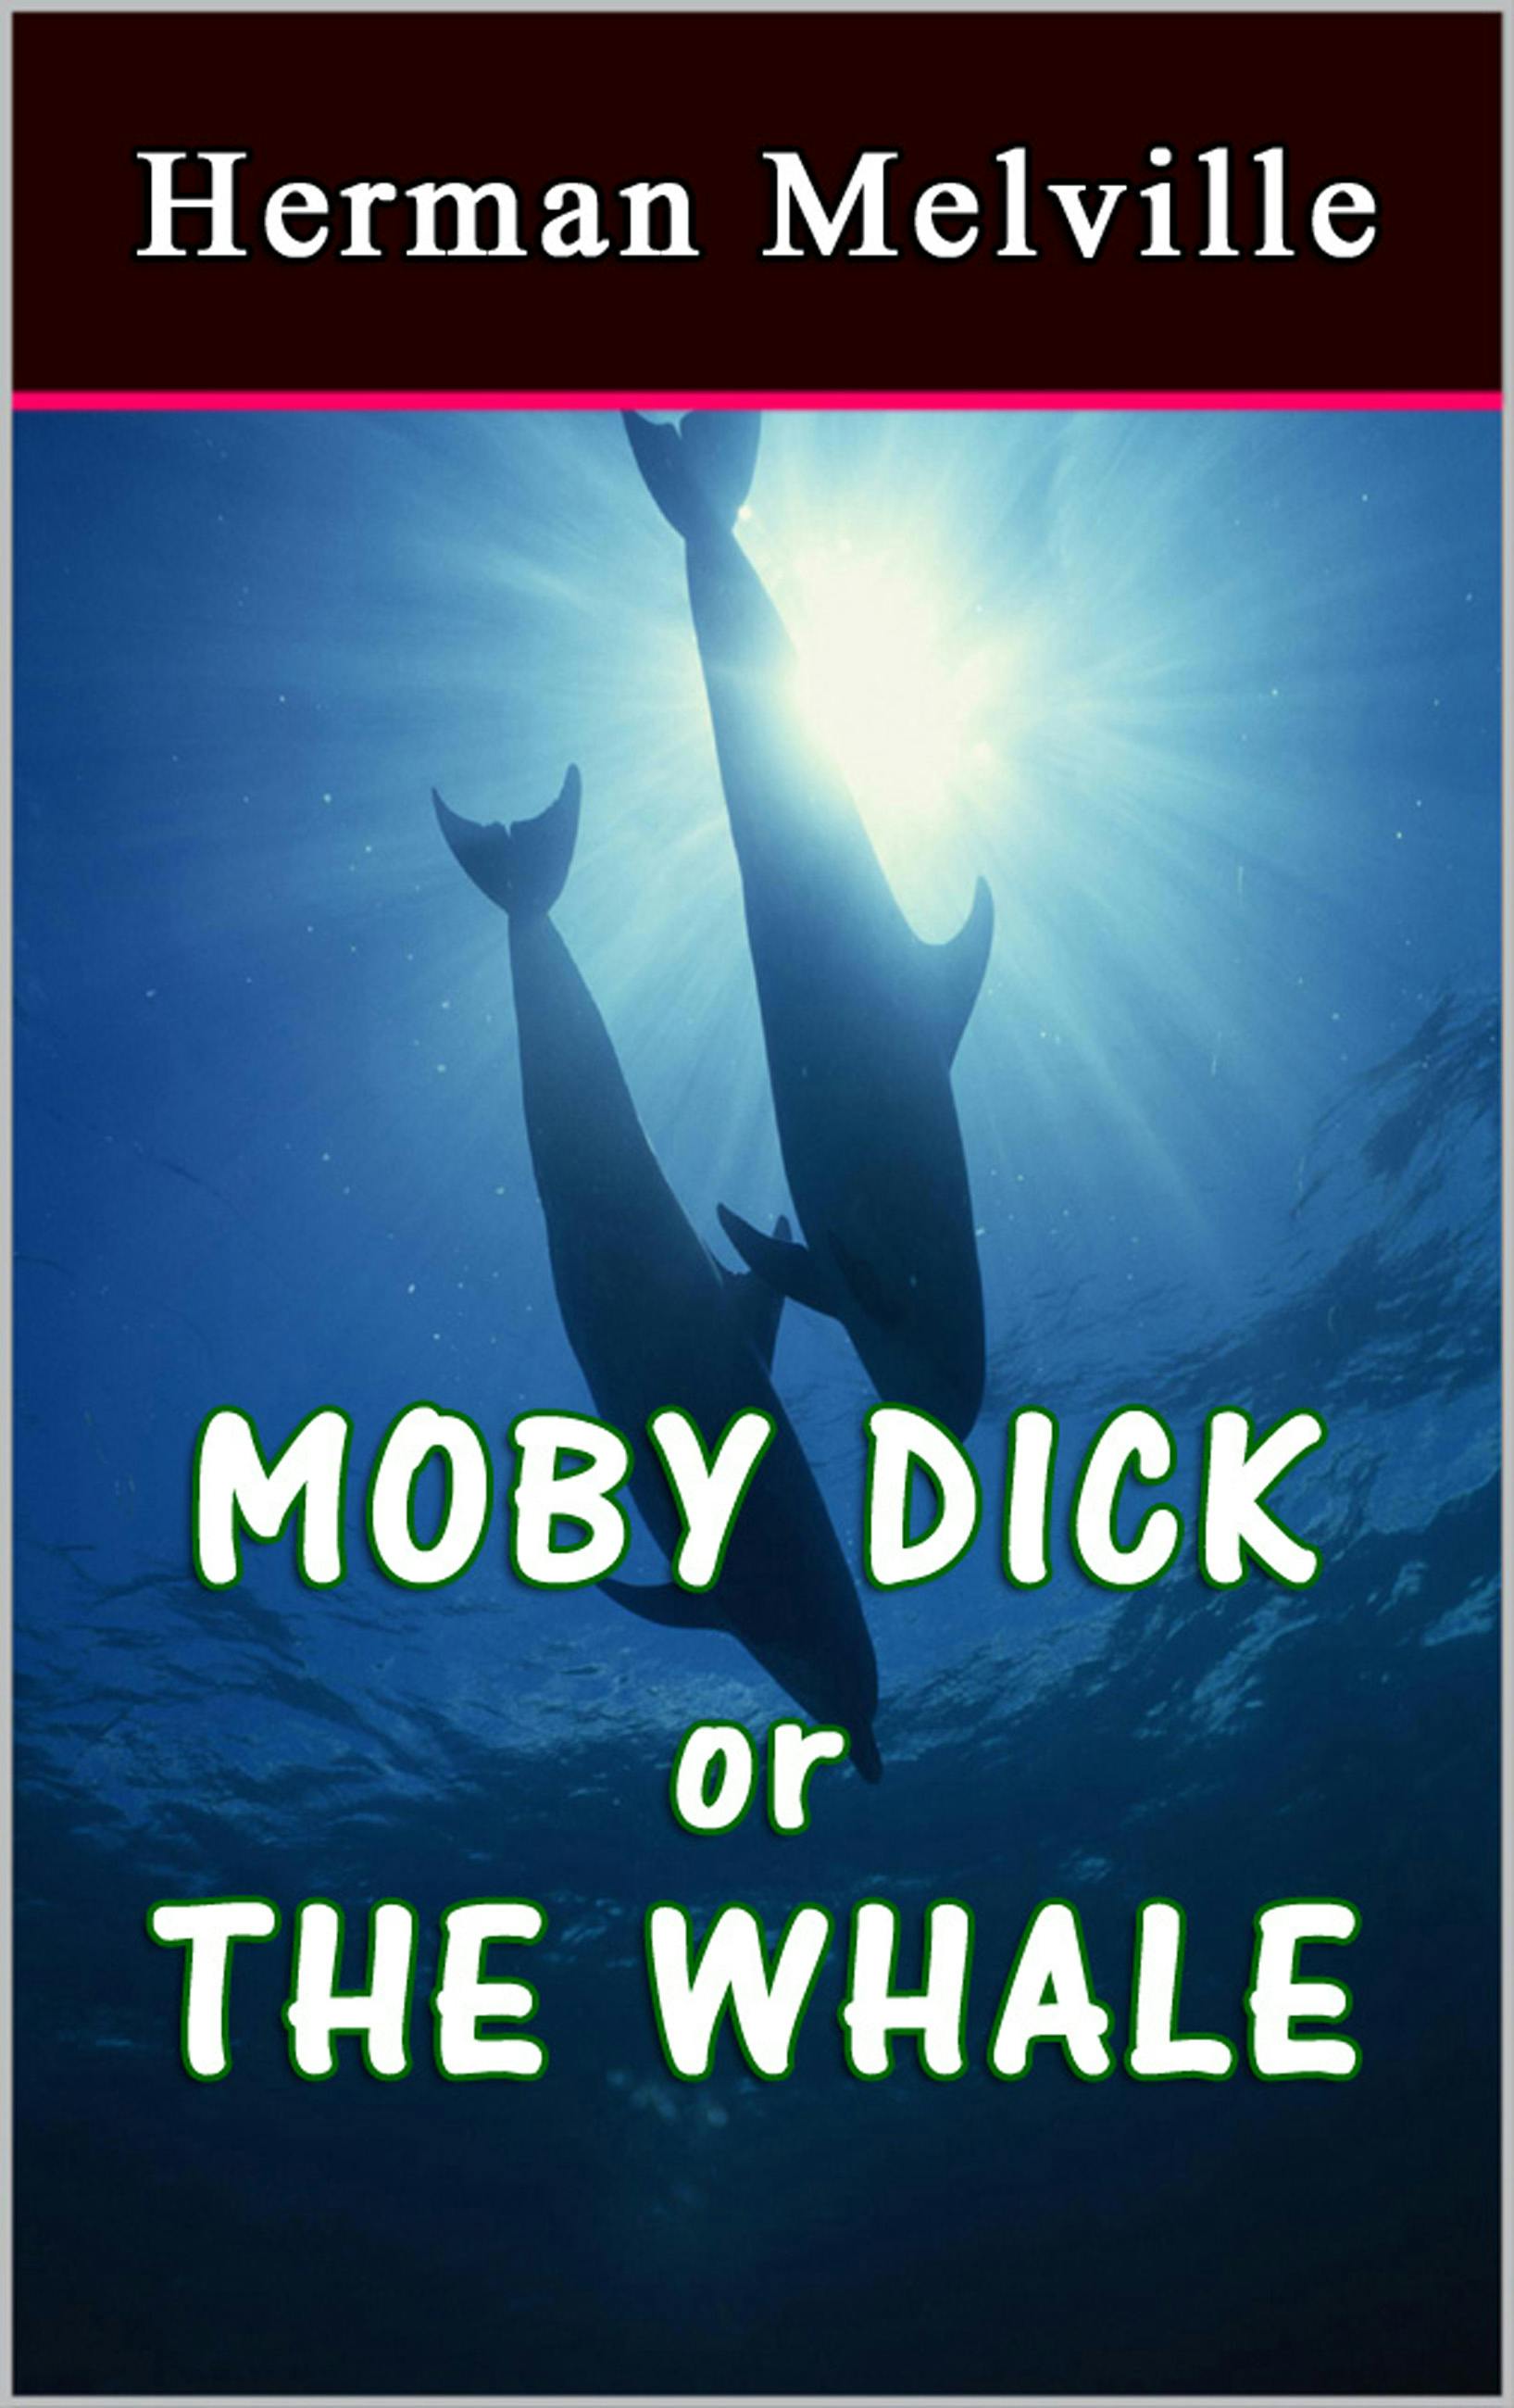 Moby Dick or The Whale - undefined